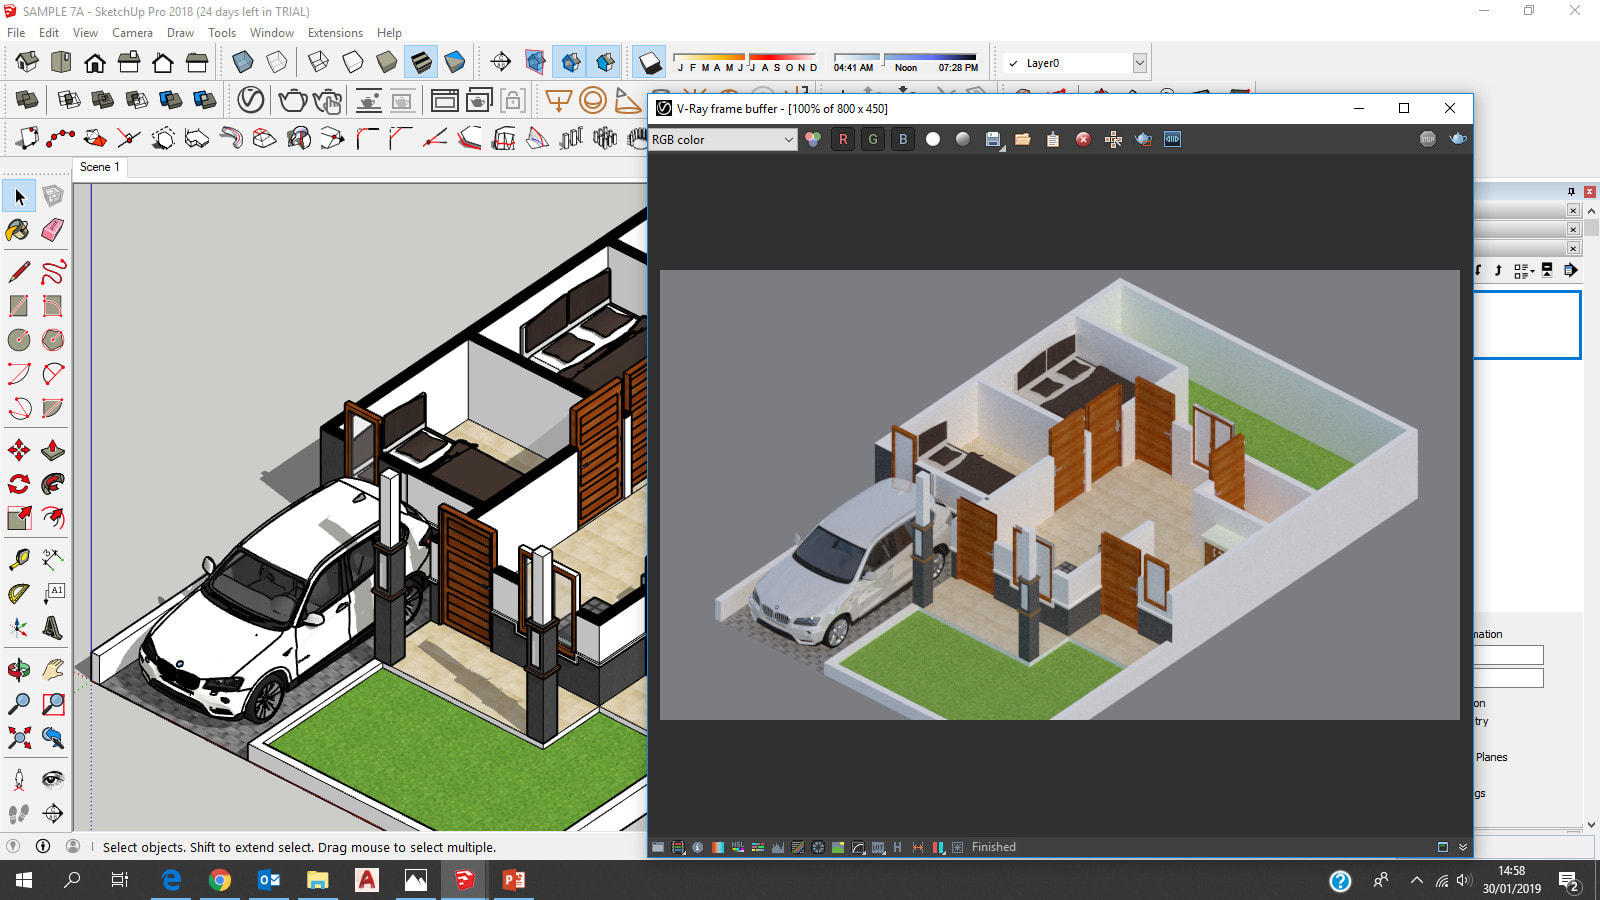 sketchup 2018 pro trial download